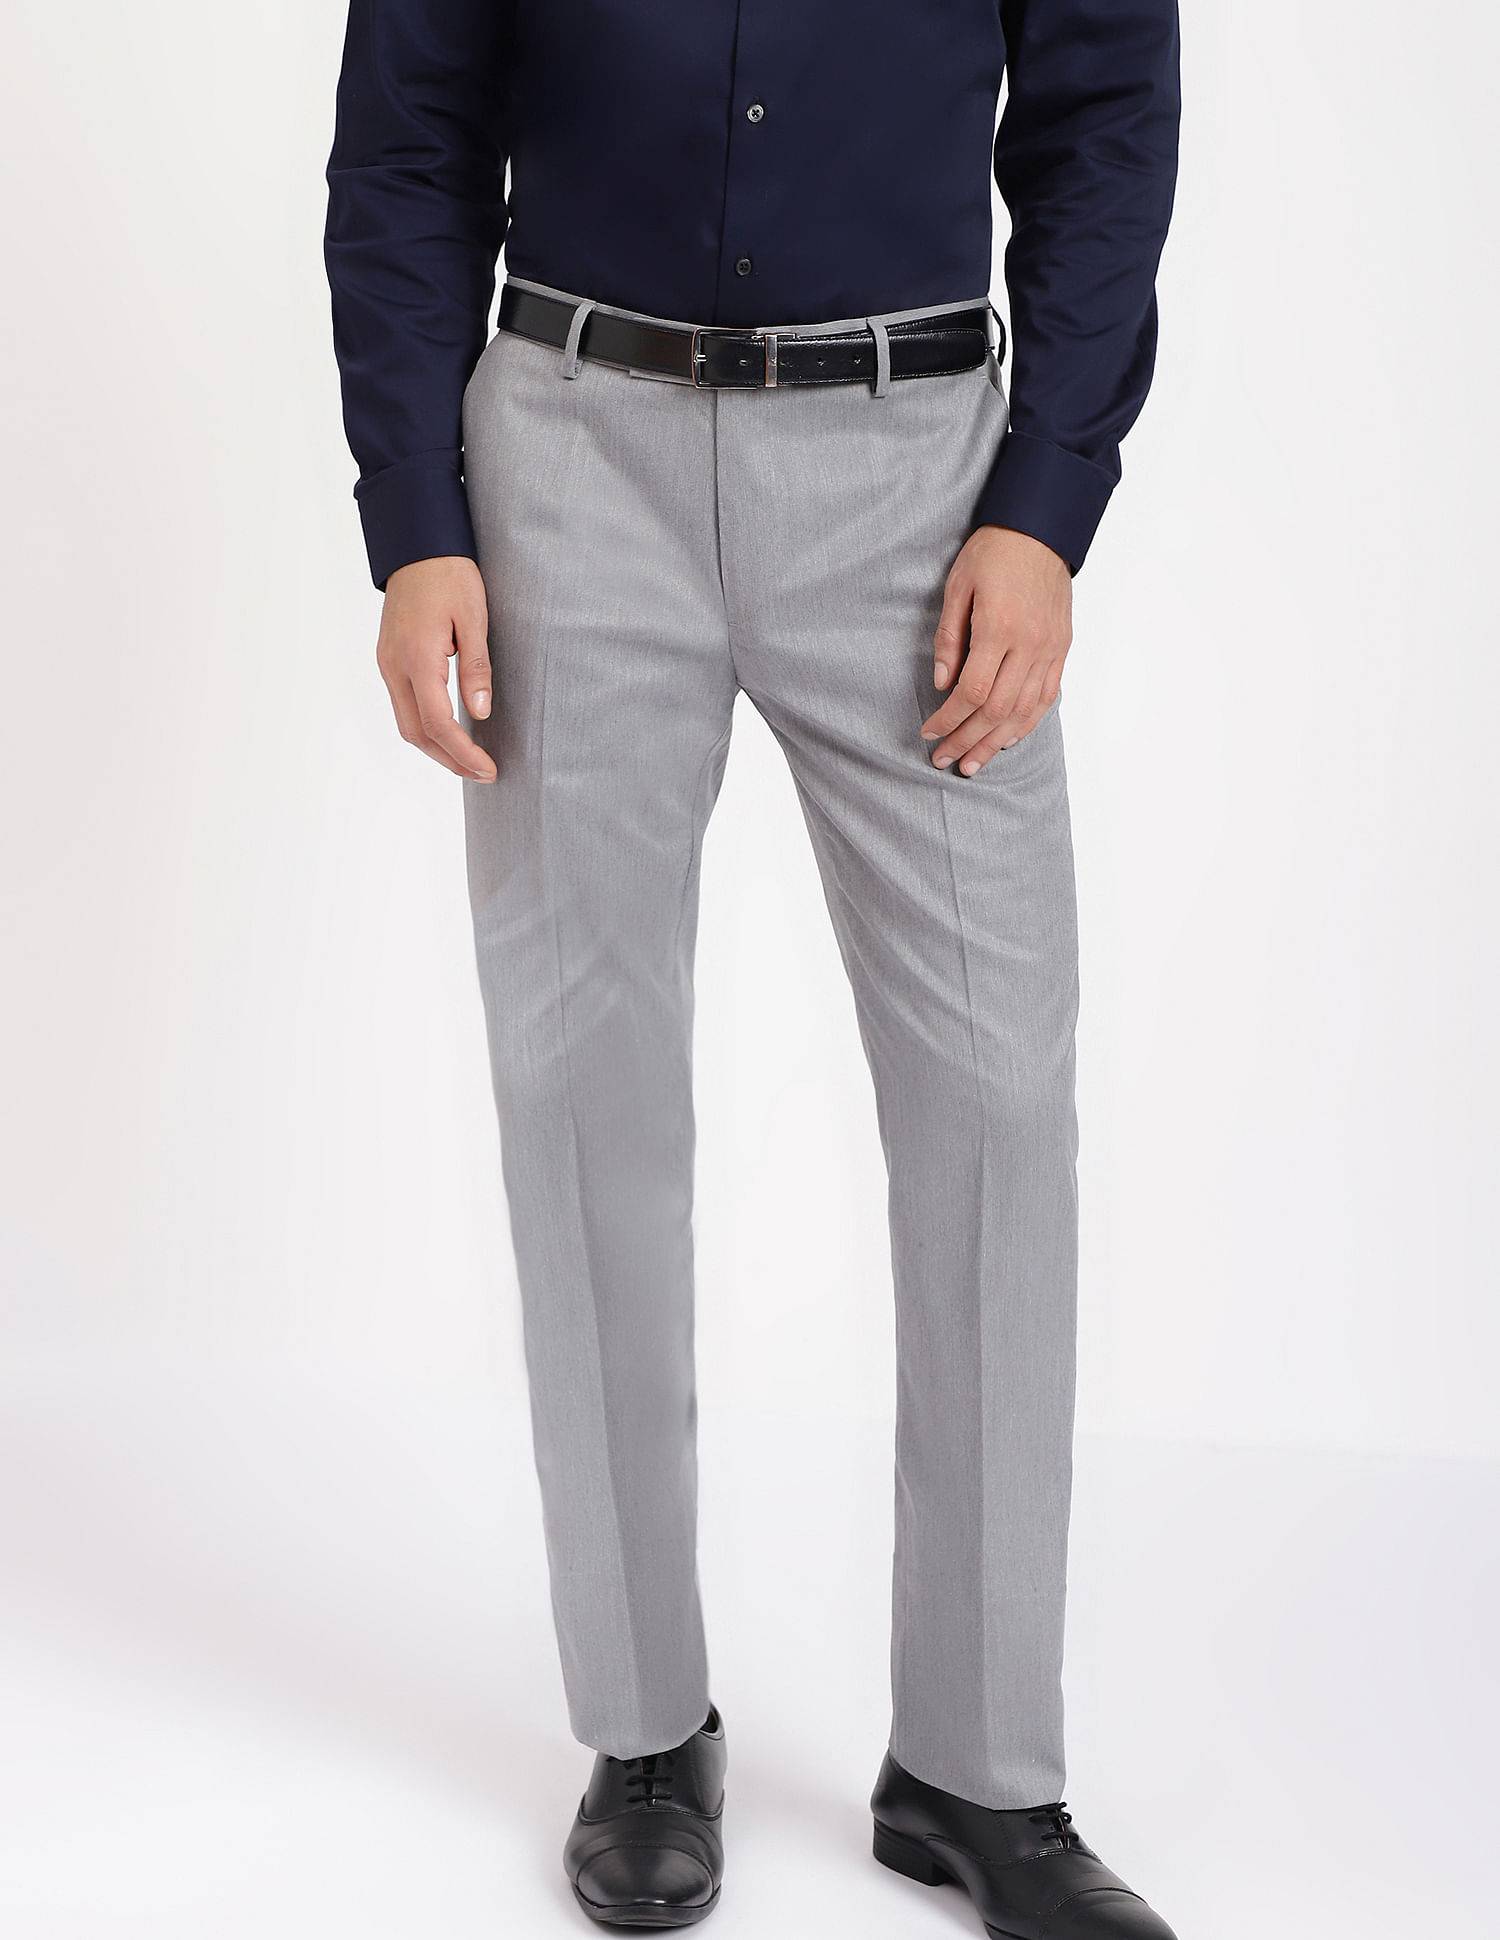 Buy Arrow Mid Rise Grid Tattersall Check Formal Trousers - NNNOW.com